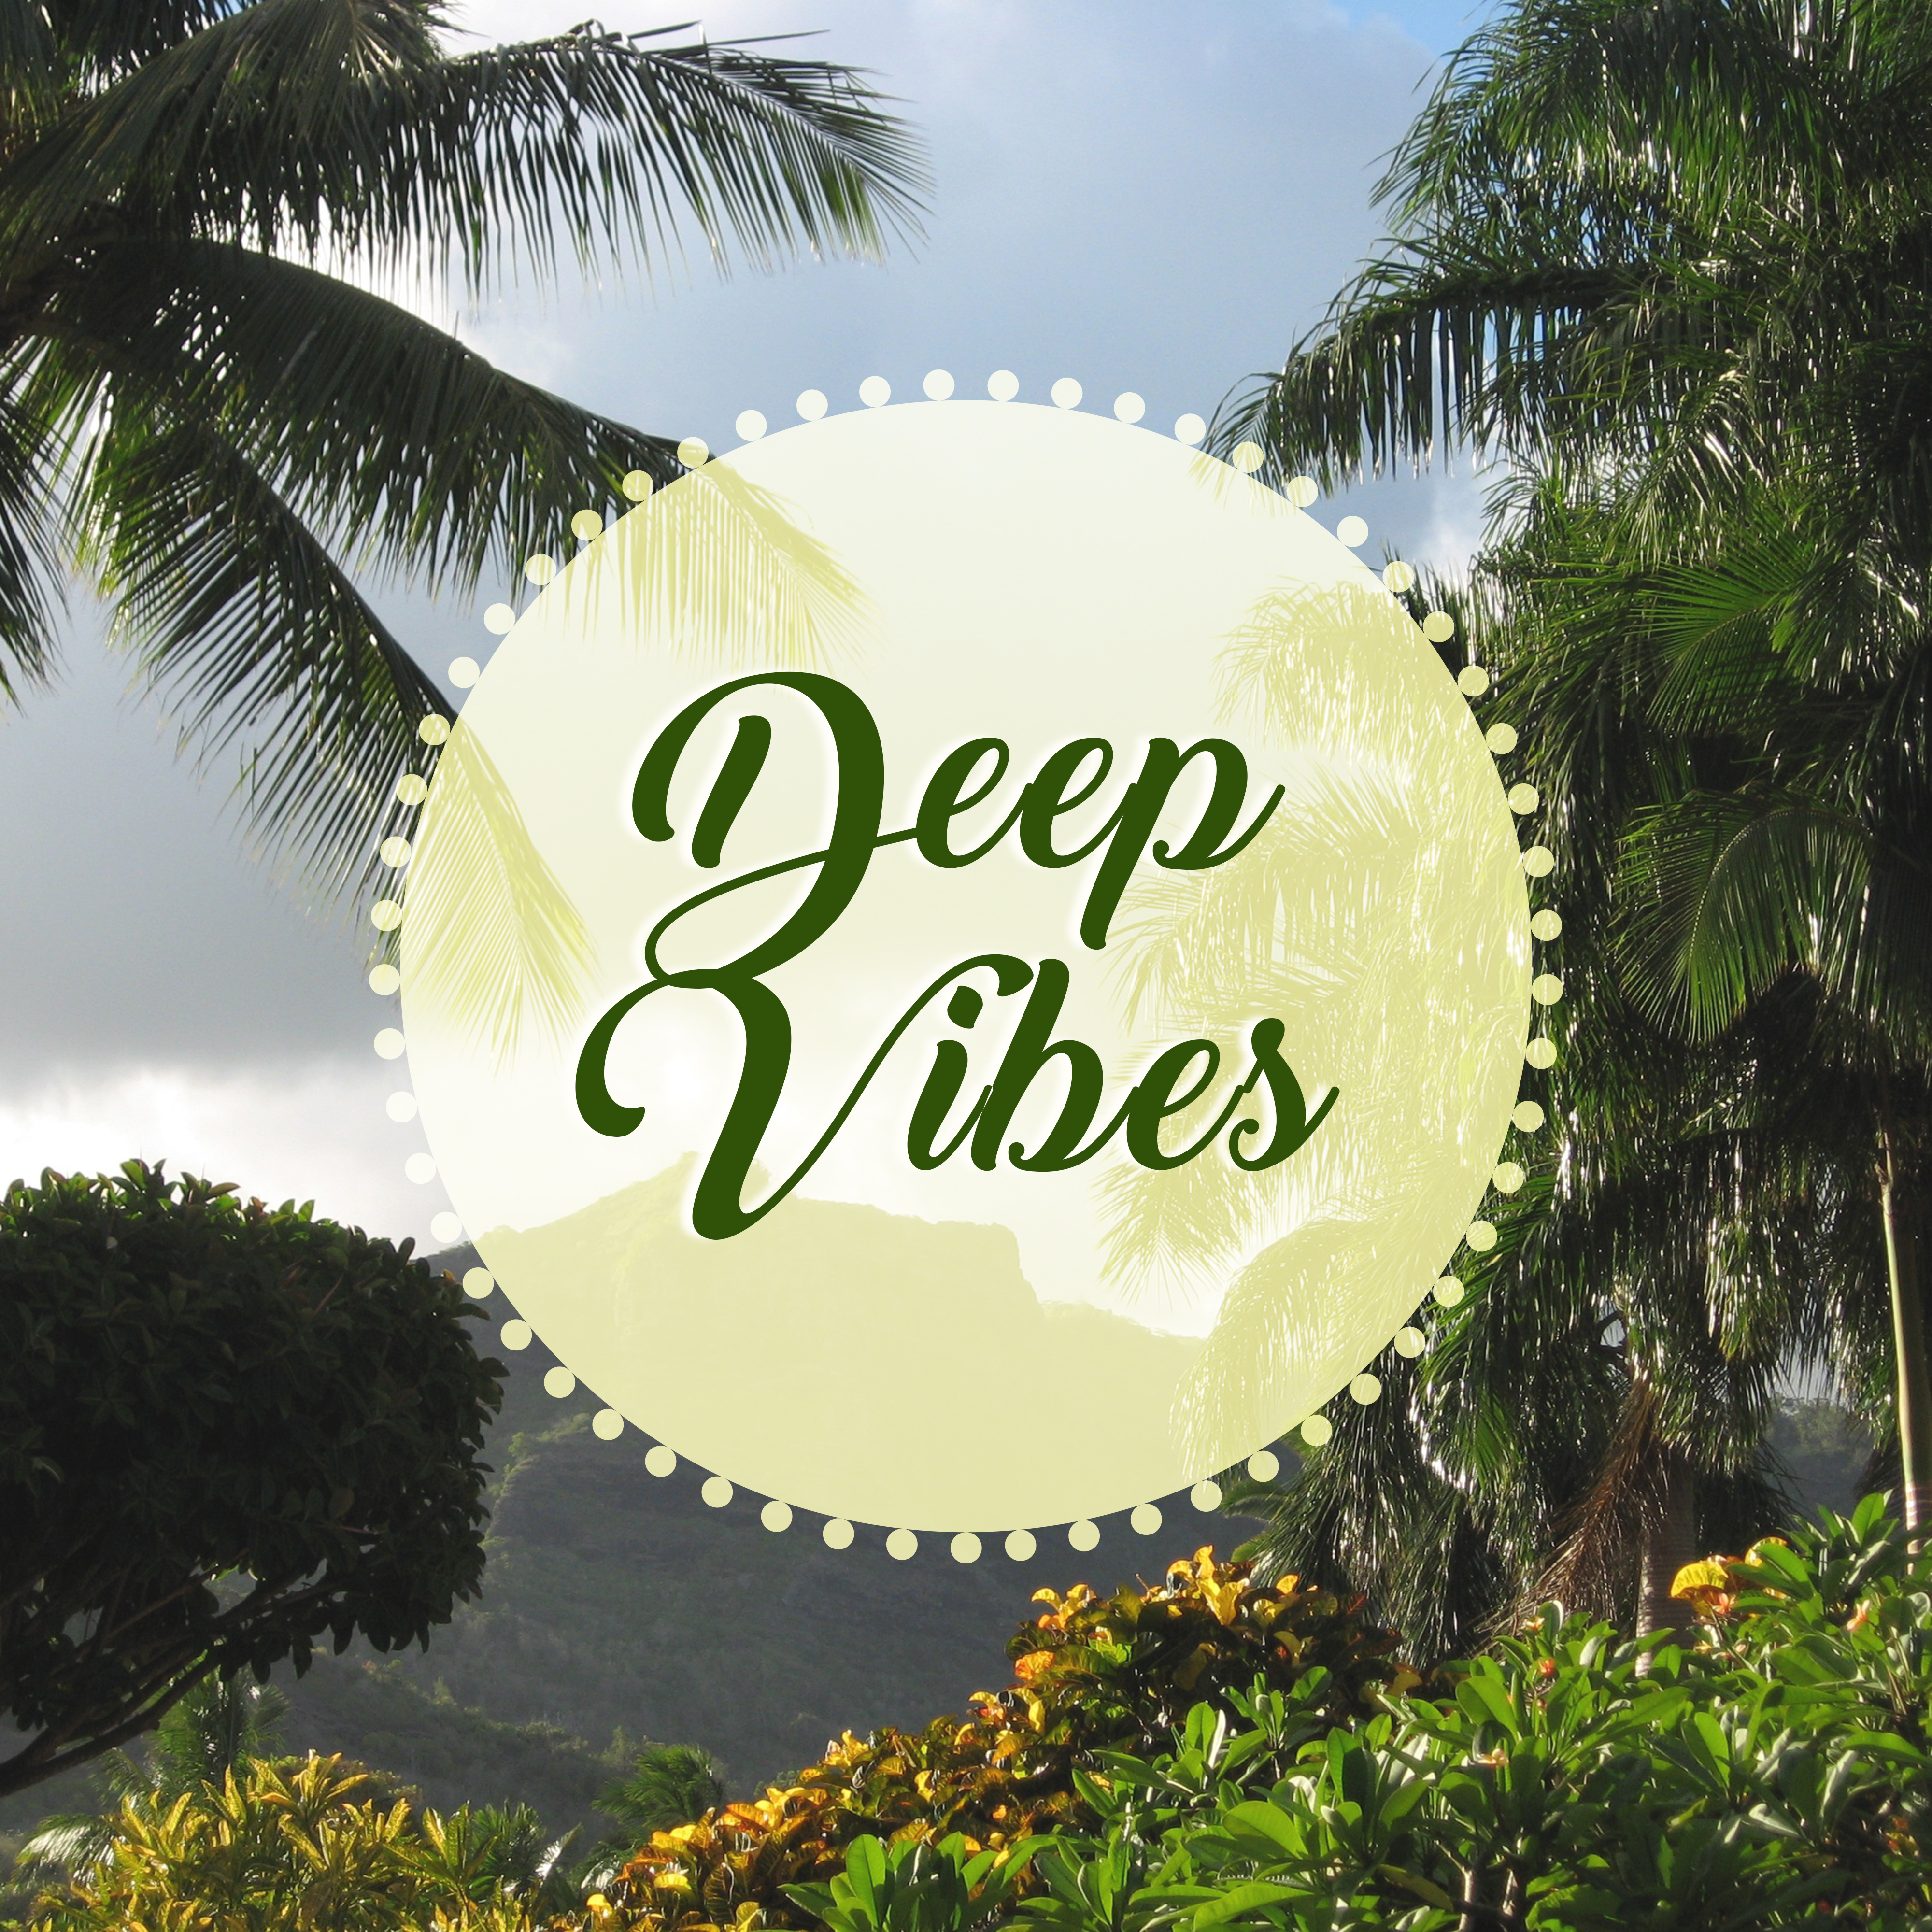 Deep Vibes – Best Chill Out Music, Relaxing Sounds, Pure Mind, Keep Calm, Just Relax, Beach Chill